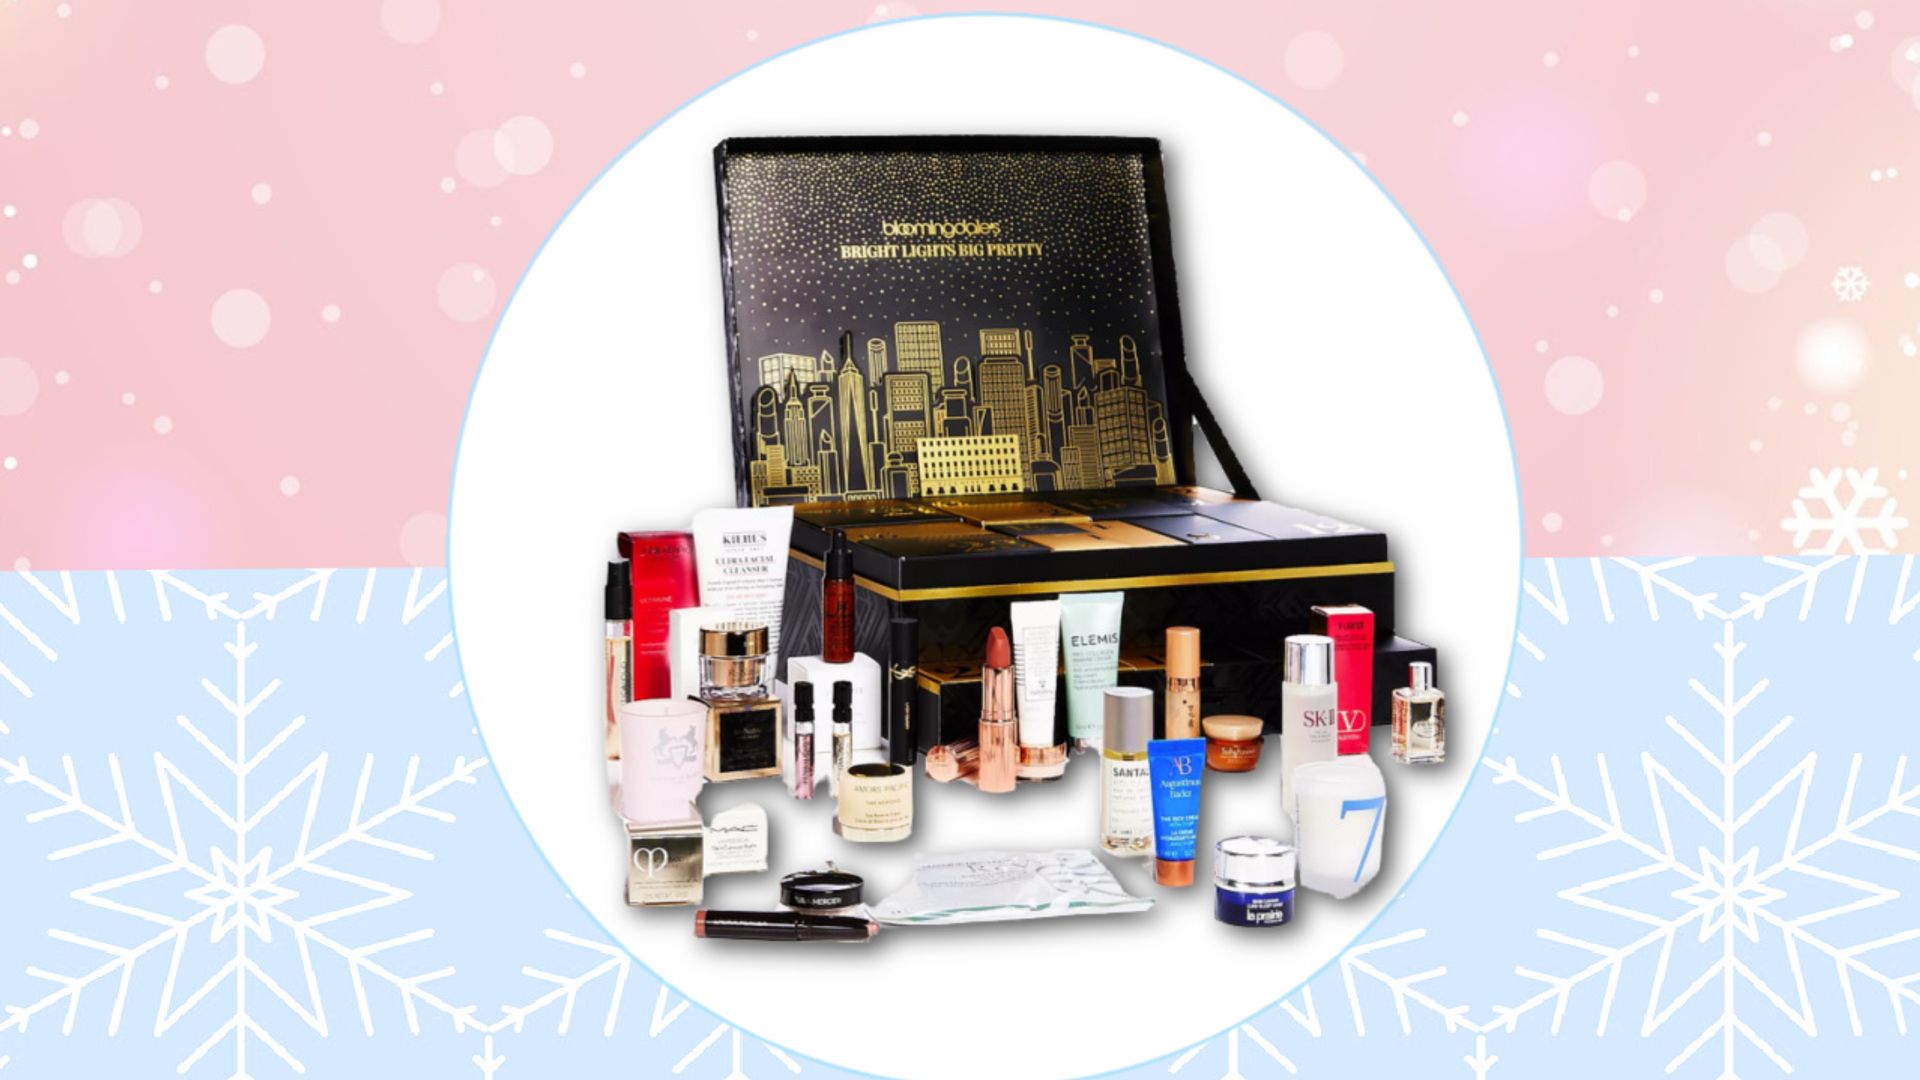 Bloomingdale's dropped an exclusive luxury beauty advent calendar worth